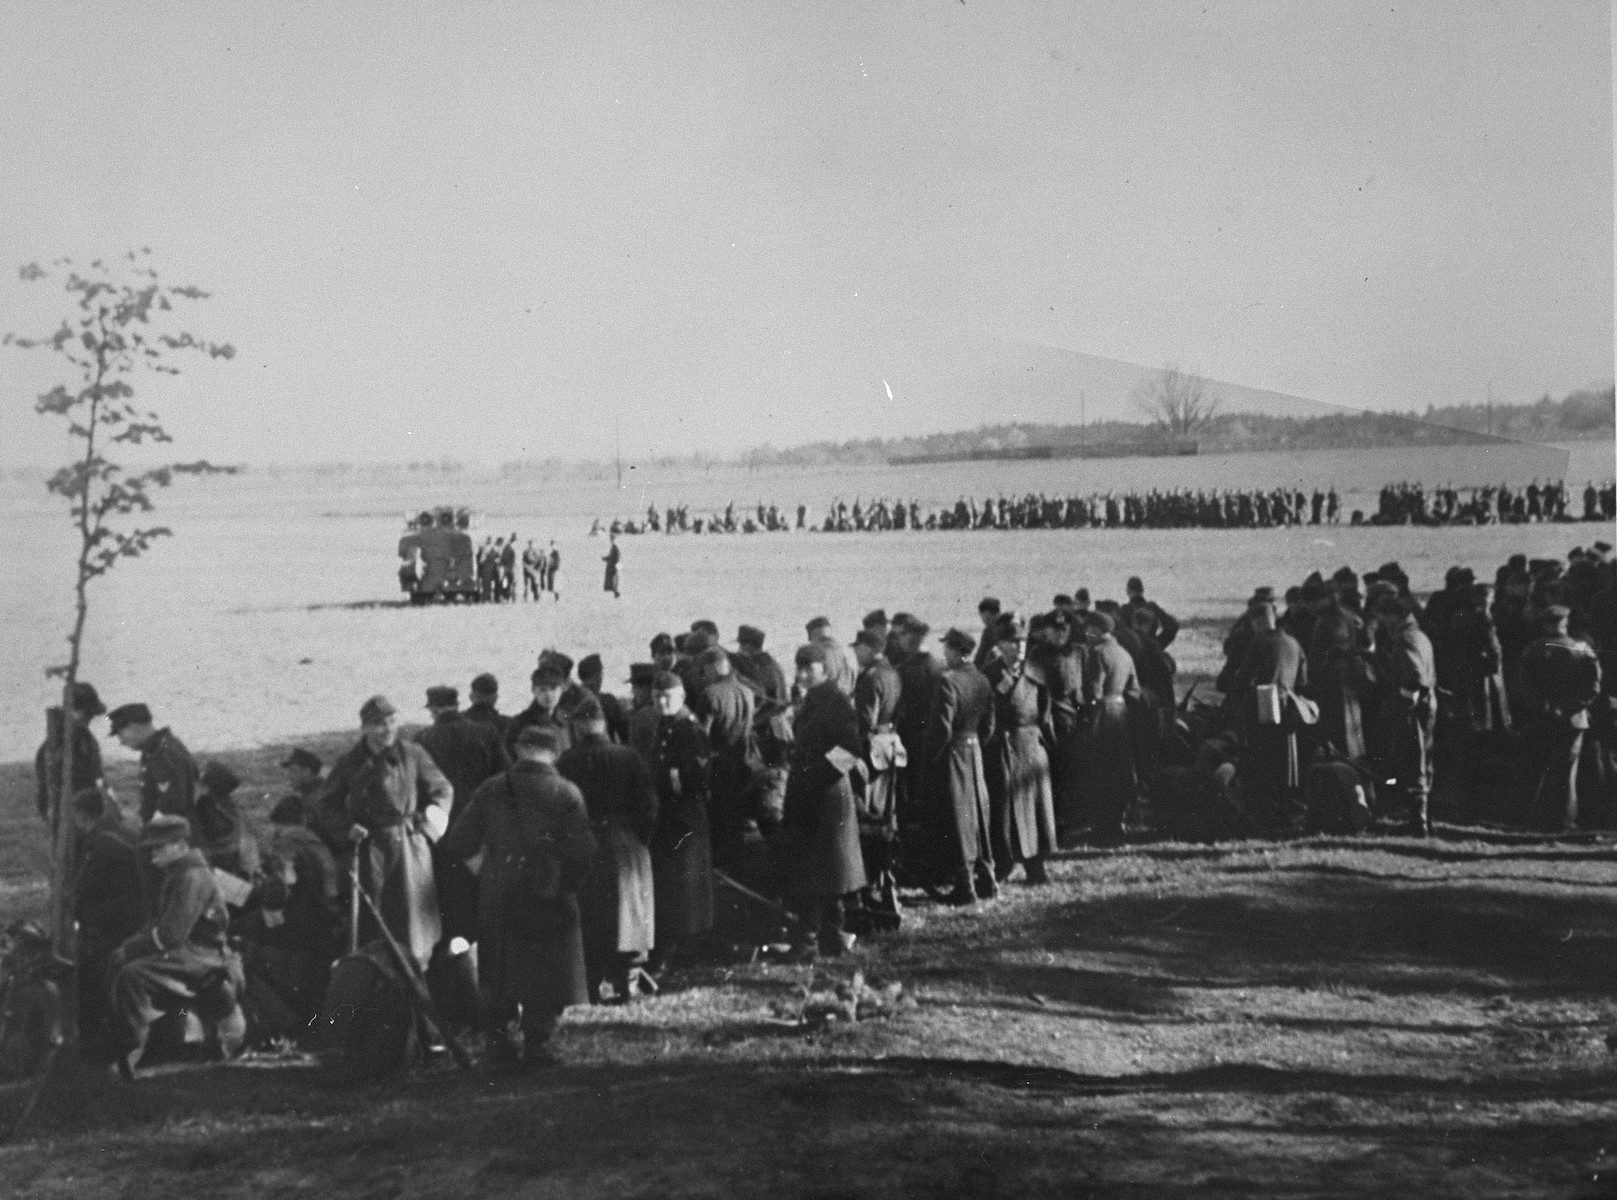 British liberators of Bergen-Belsen concentration camp prepare former SS guards and camp personnel for burying the corpses of prisoners killed in the camp.